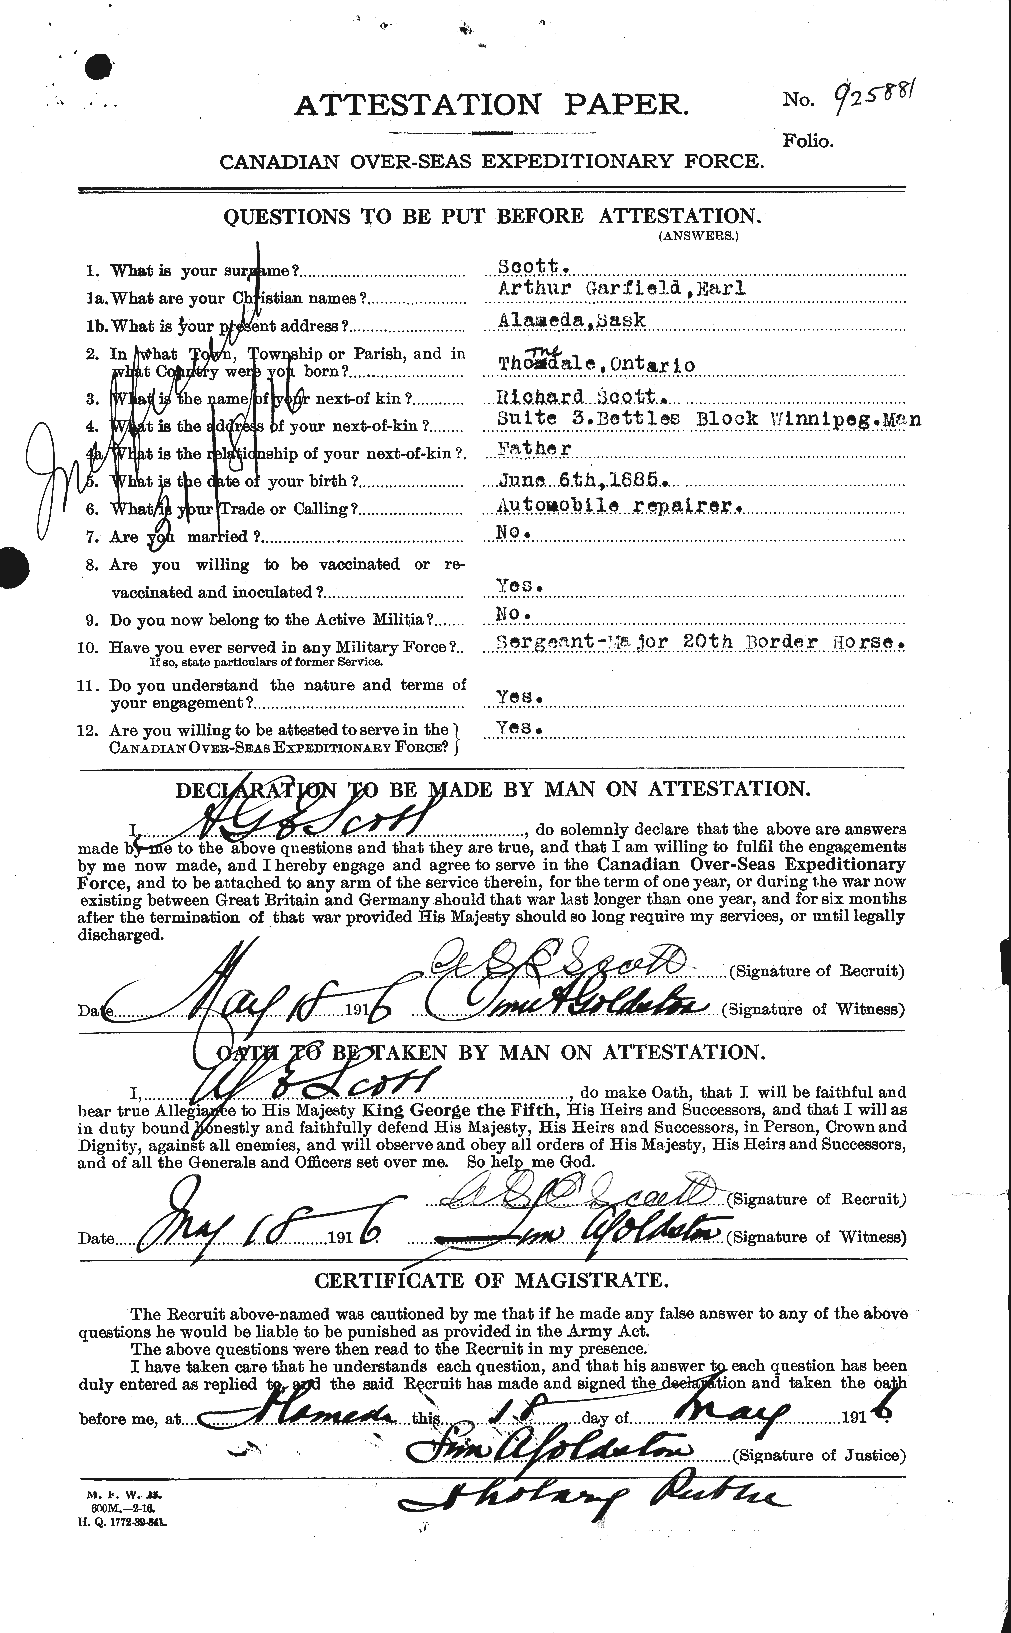 Personnel Records of the First World War - CEF 086403a